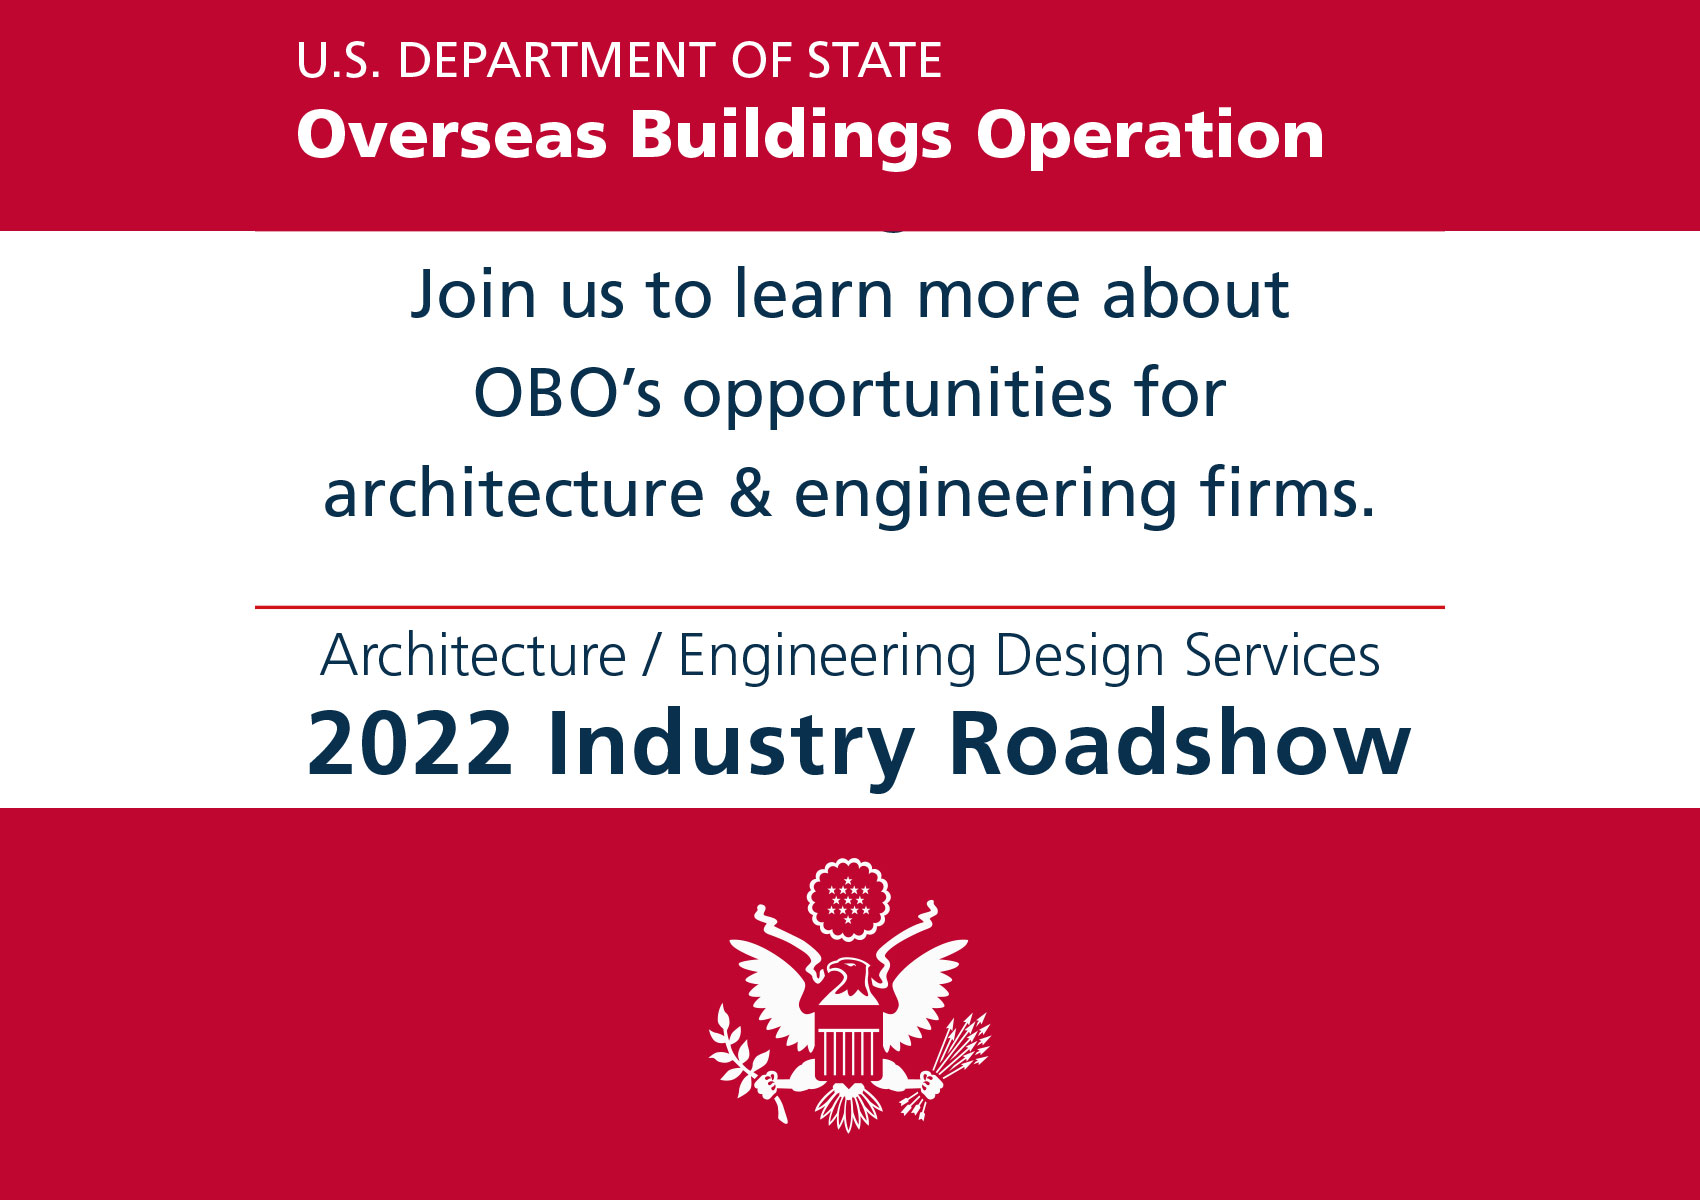 2022 Architecture / Engineering Design Services Industry Roadshow